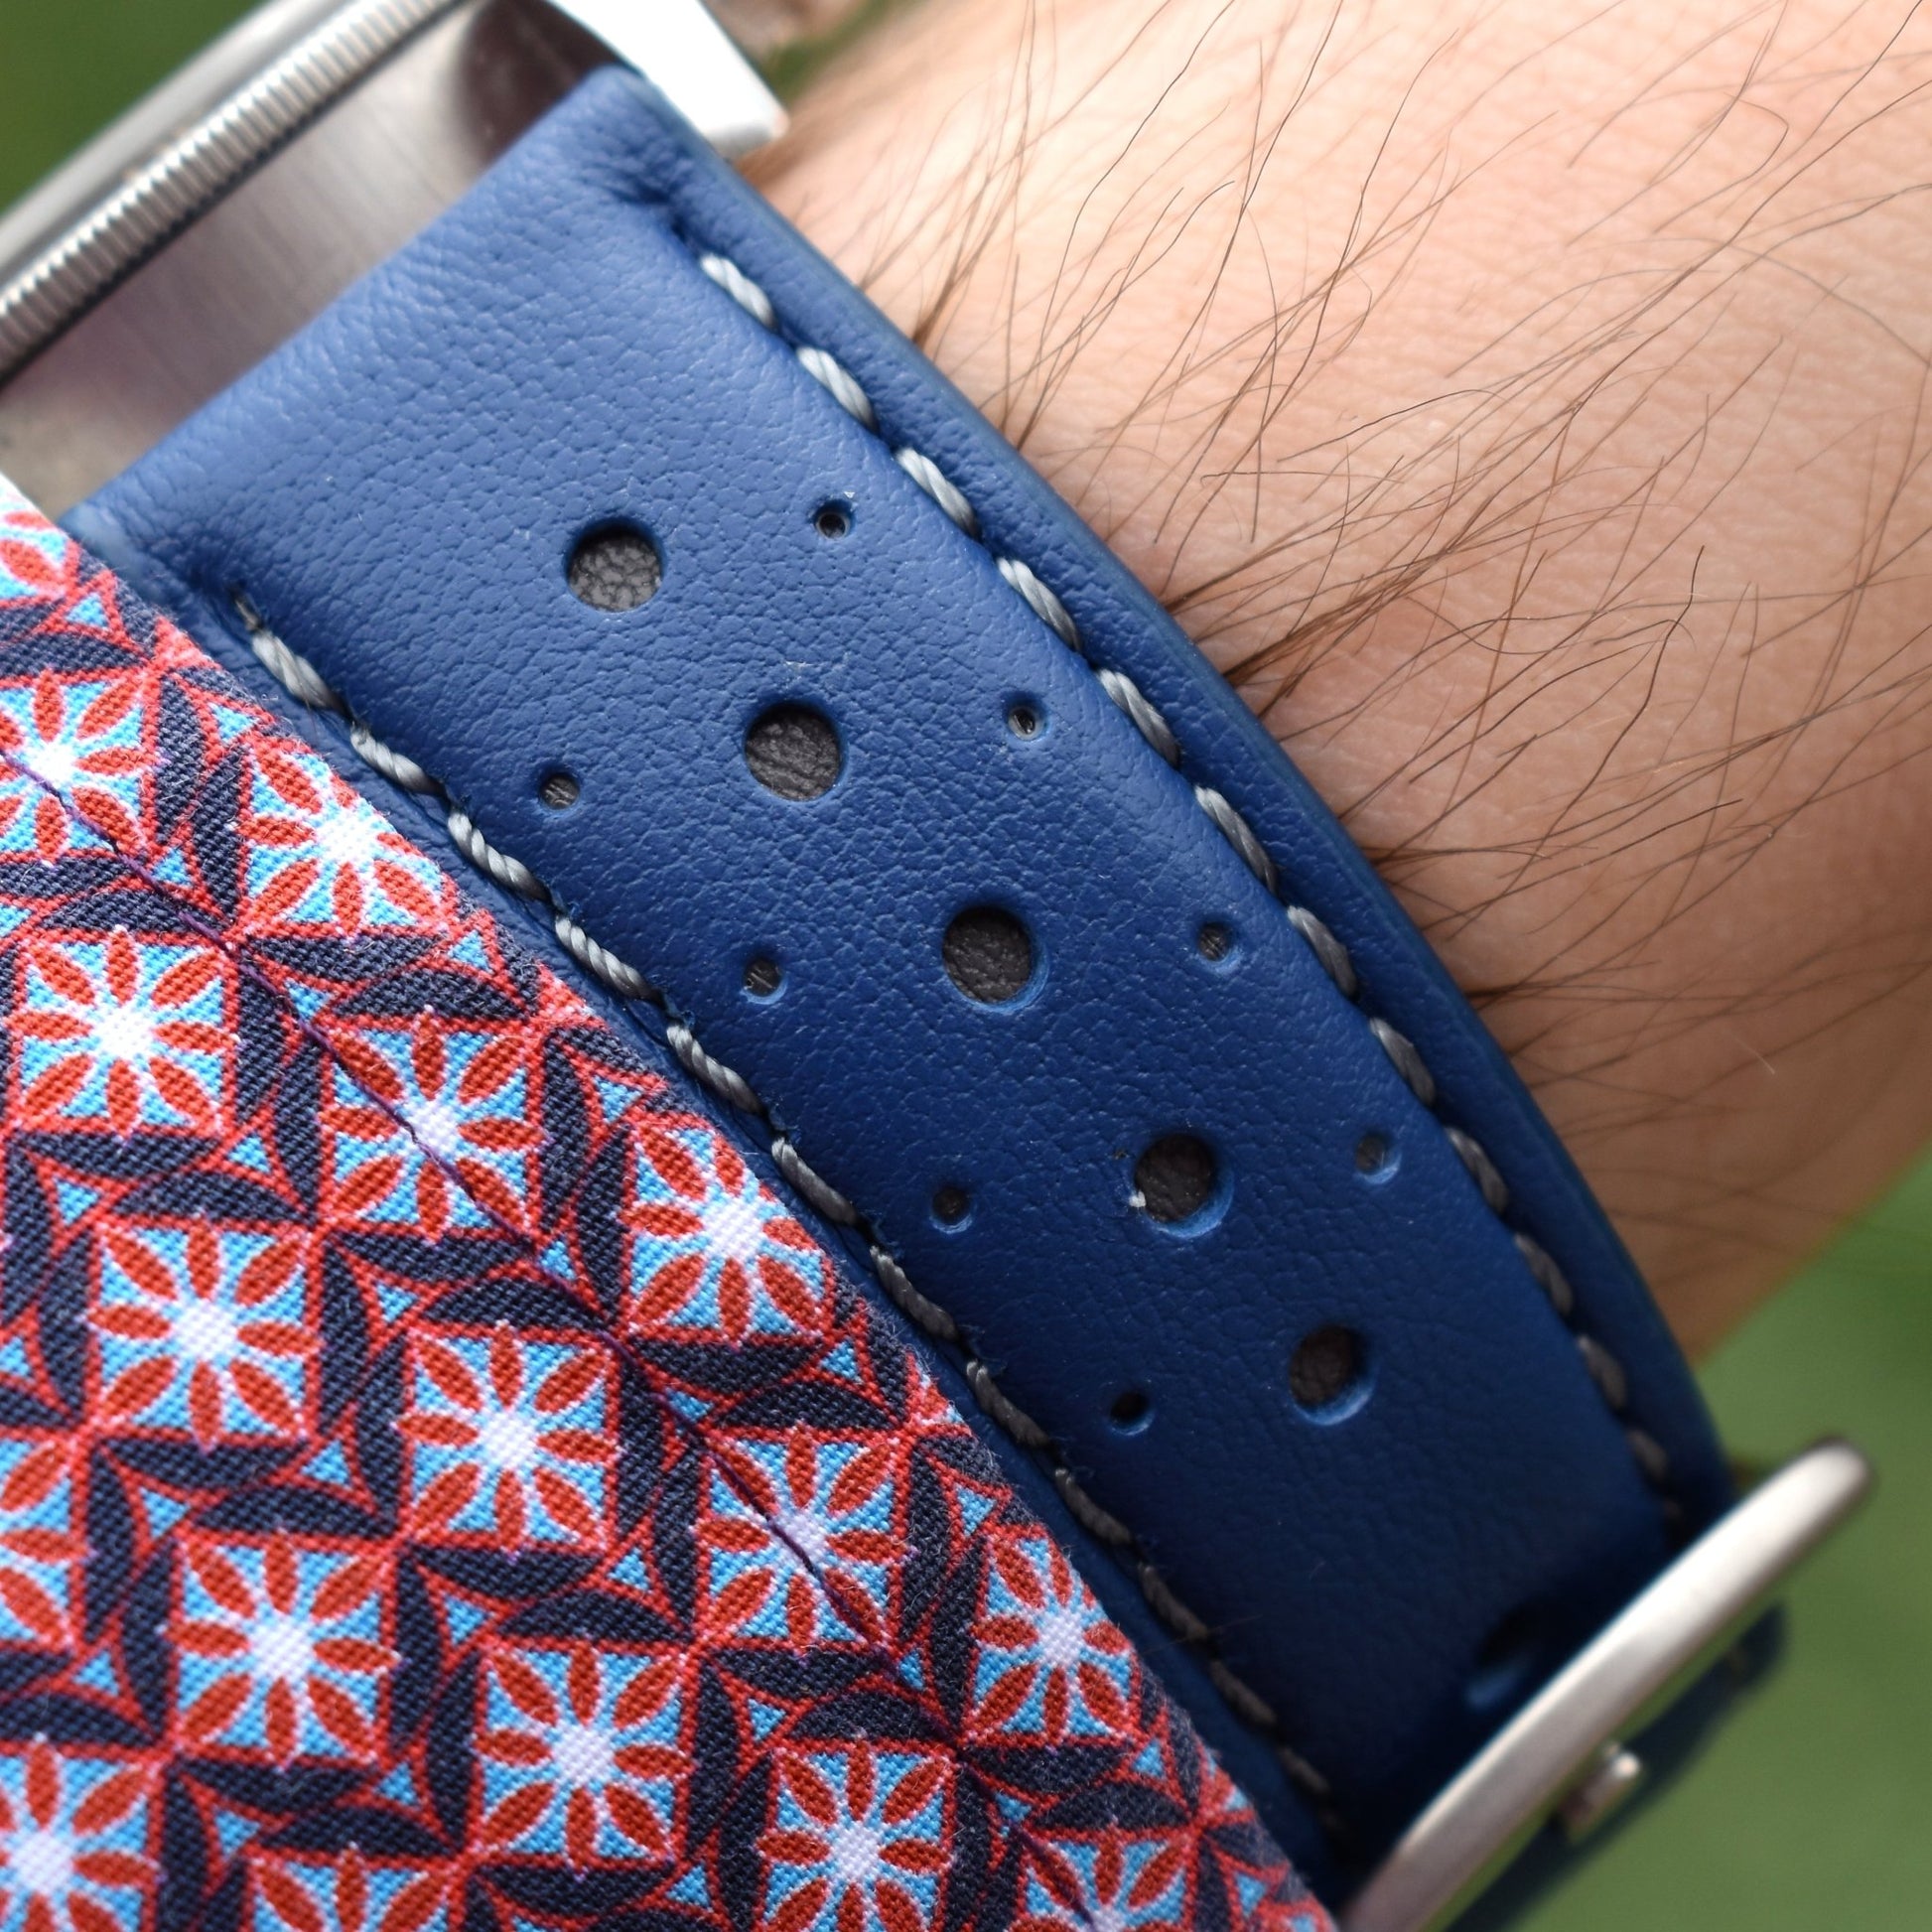 Wrist shot of the Le Mans cobalt blue and grey racing apple watch strap. Mens sleeve, grass background.